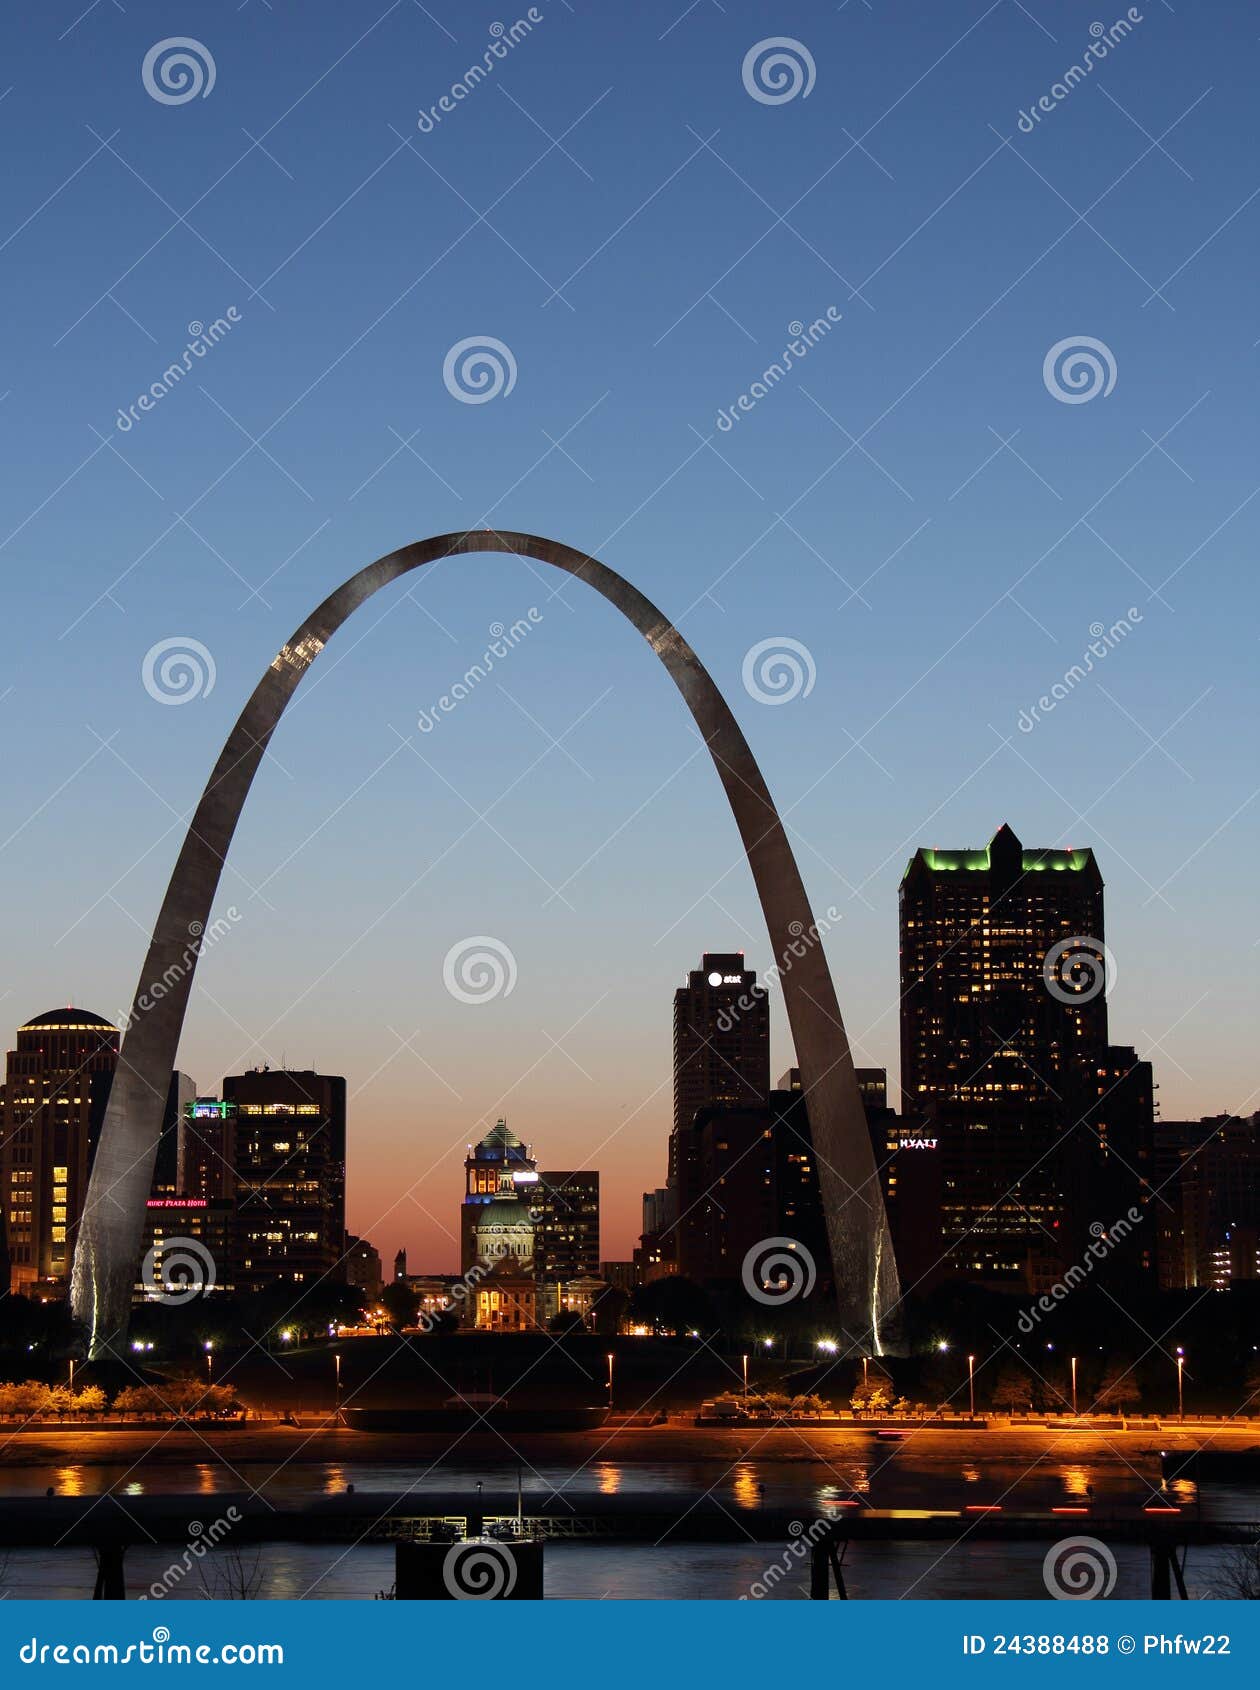 Gateway Arch In ST. Louis Night View Editorial Stock Photo - Image of night, monument: 24388488